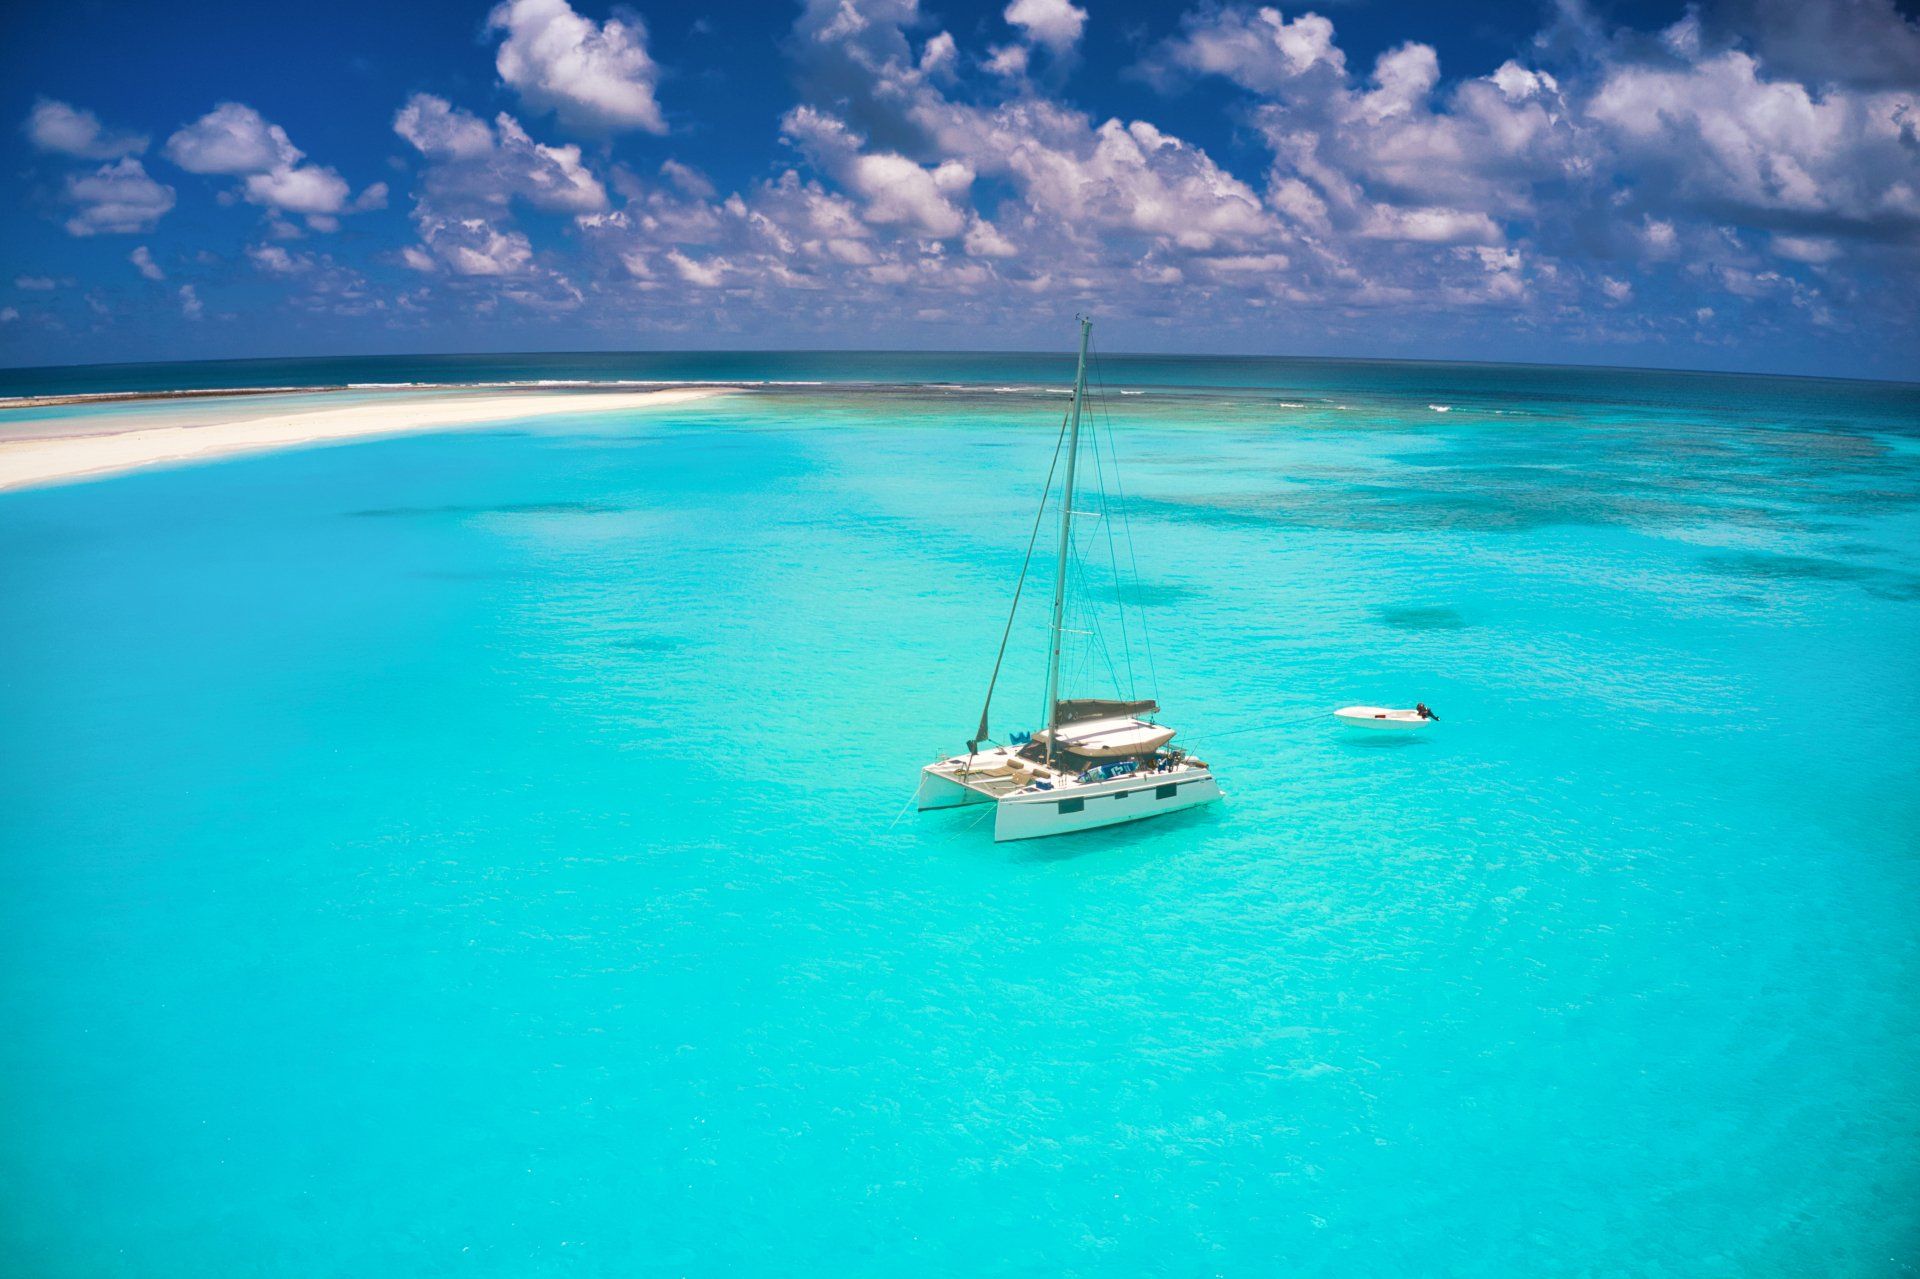 A sailboat is floating on top of a turquoise ocean.